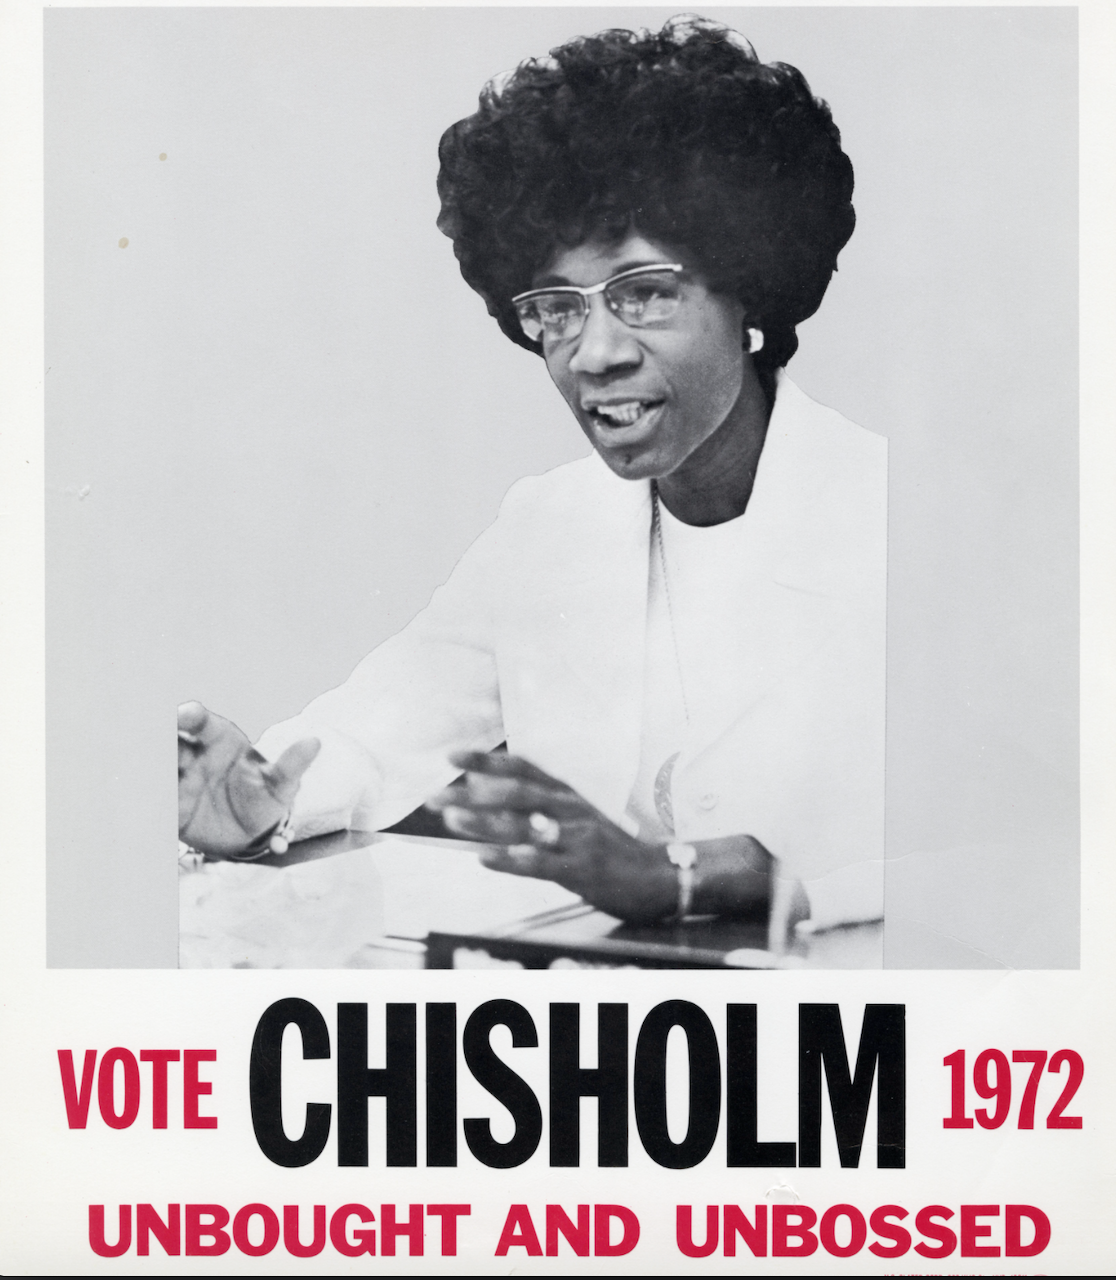 Black Women's History (Poster of Shirley Chishom "Vote Chisholm 1972, Unbought and Unbossed)